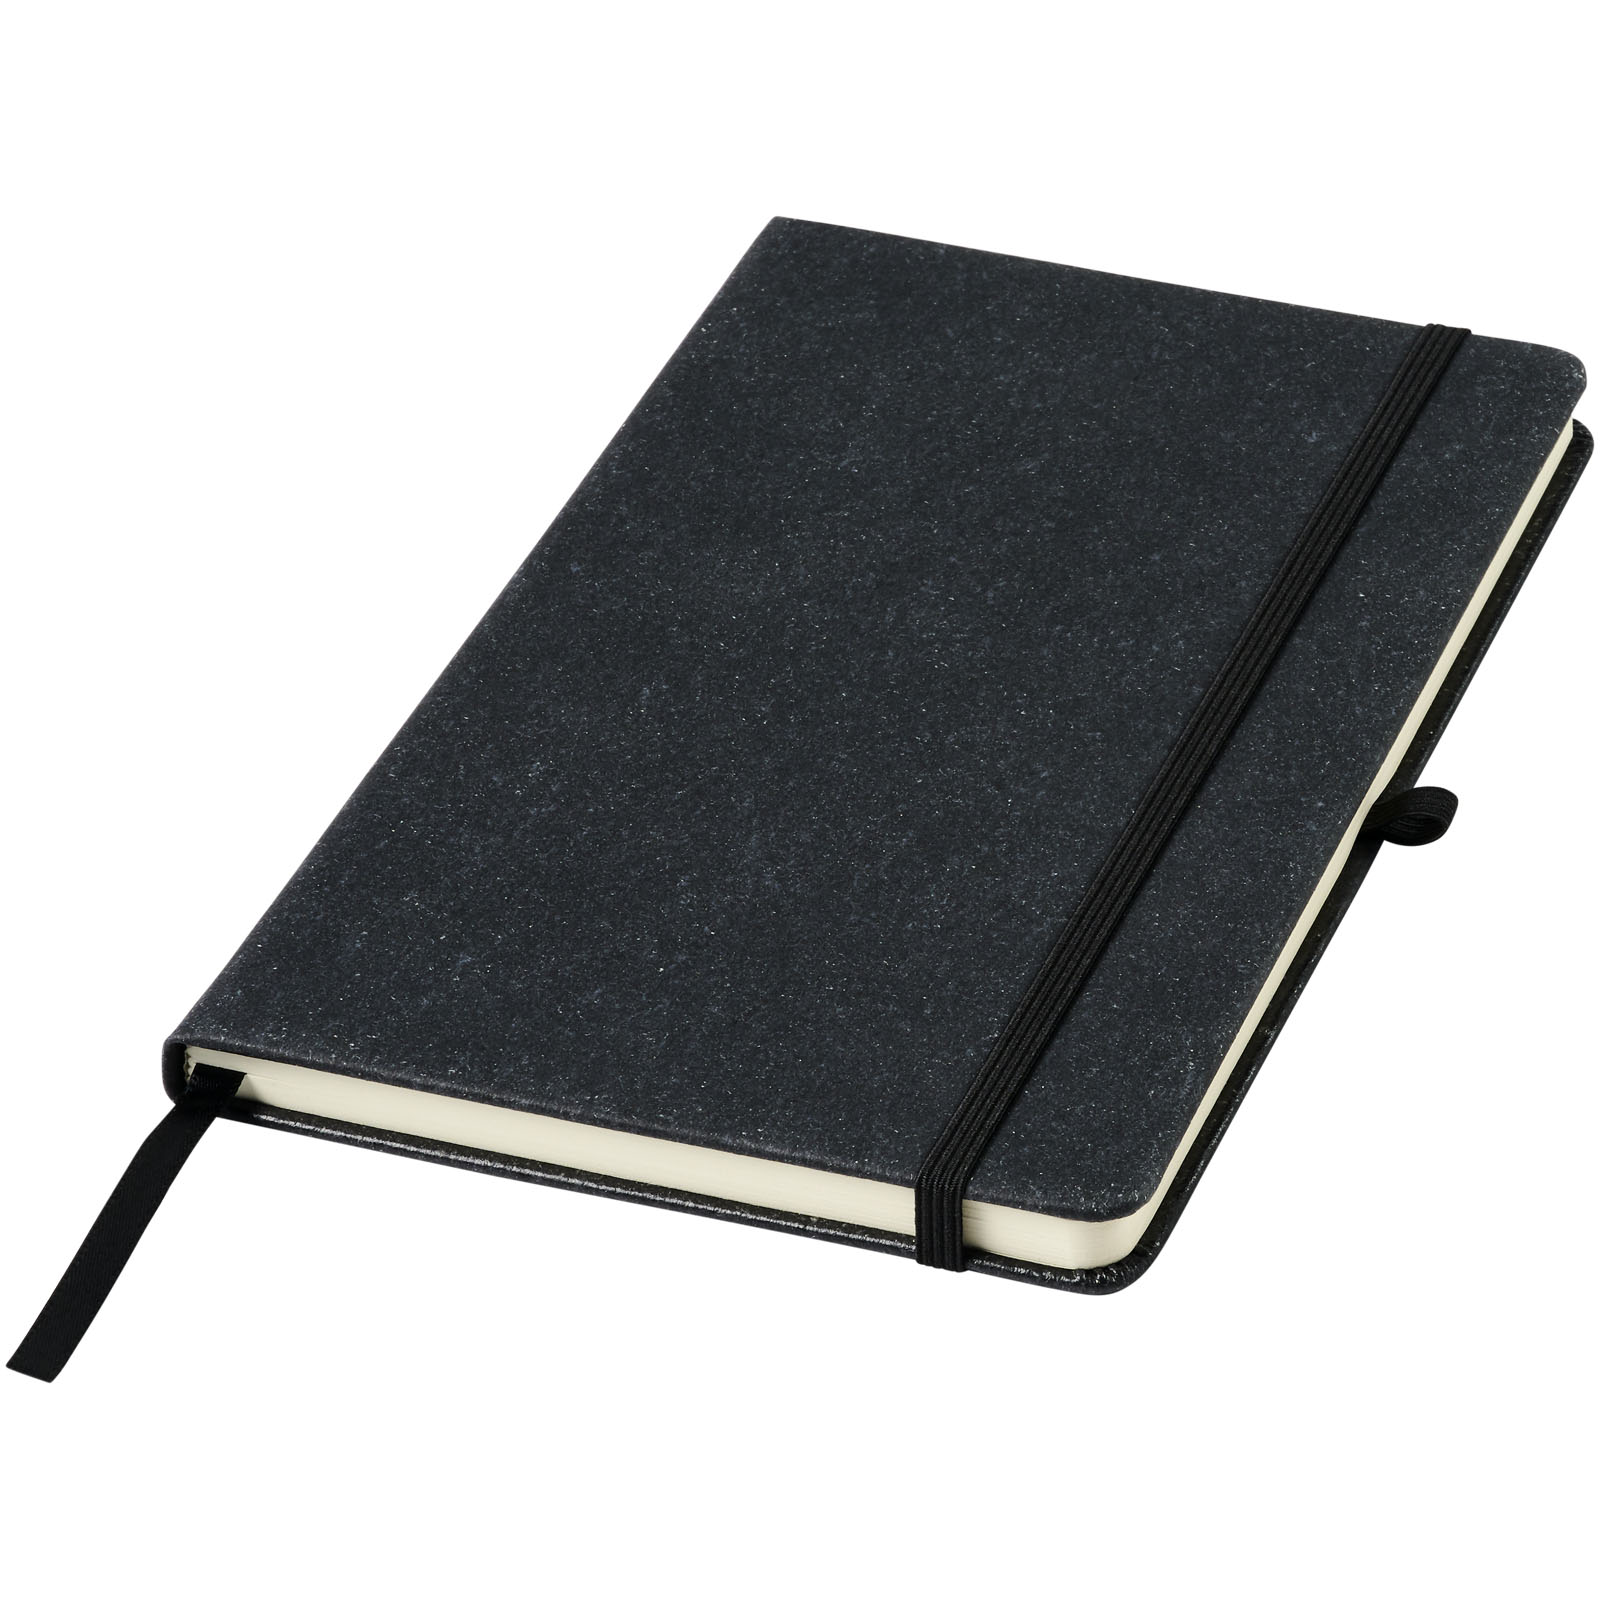 Hard cover notebooks - Atlana leather pieces notebook